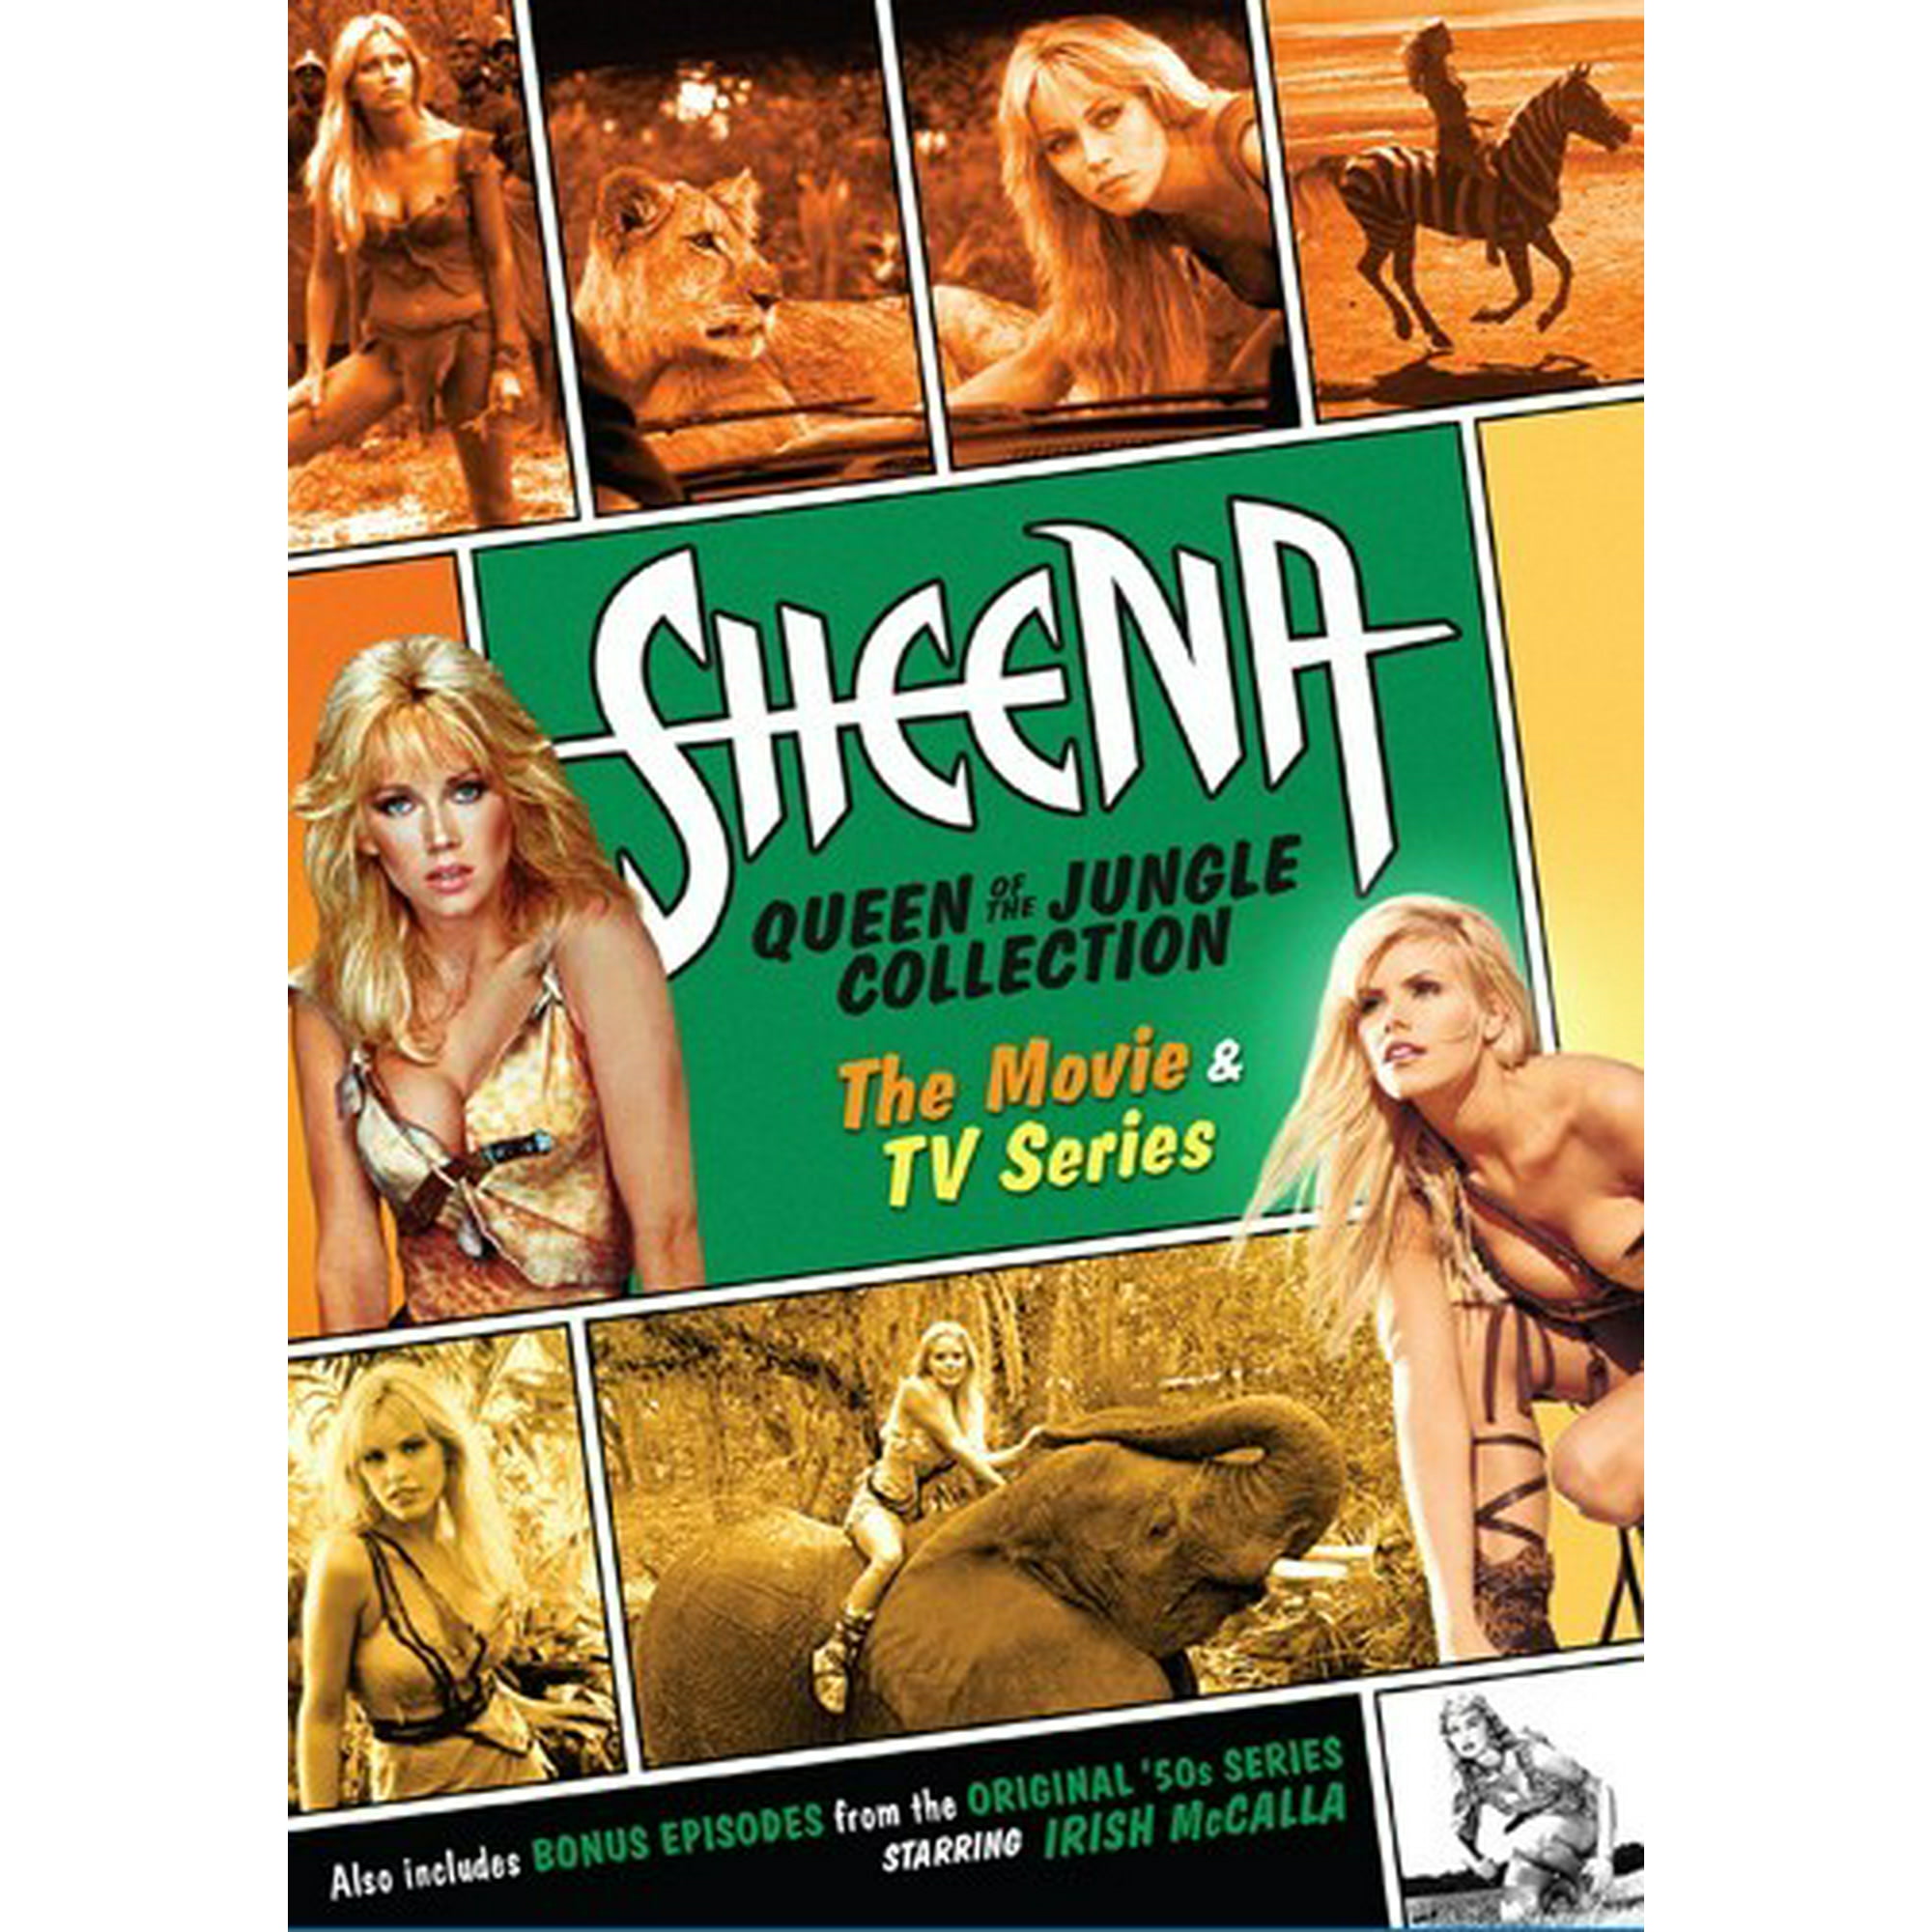 Sheena: Queen of the Jungle Collection: The Movie & TV Series